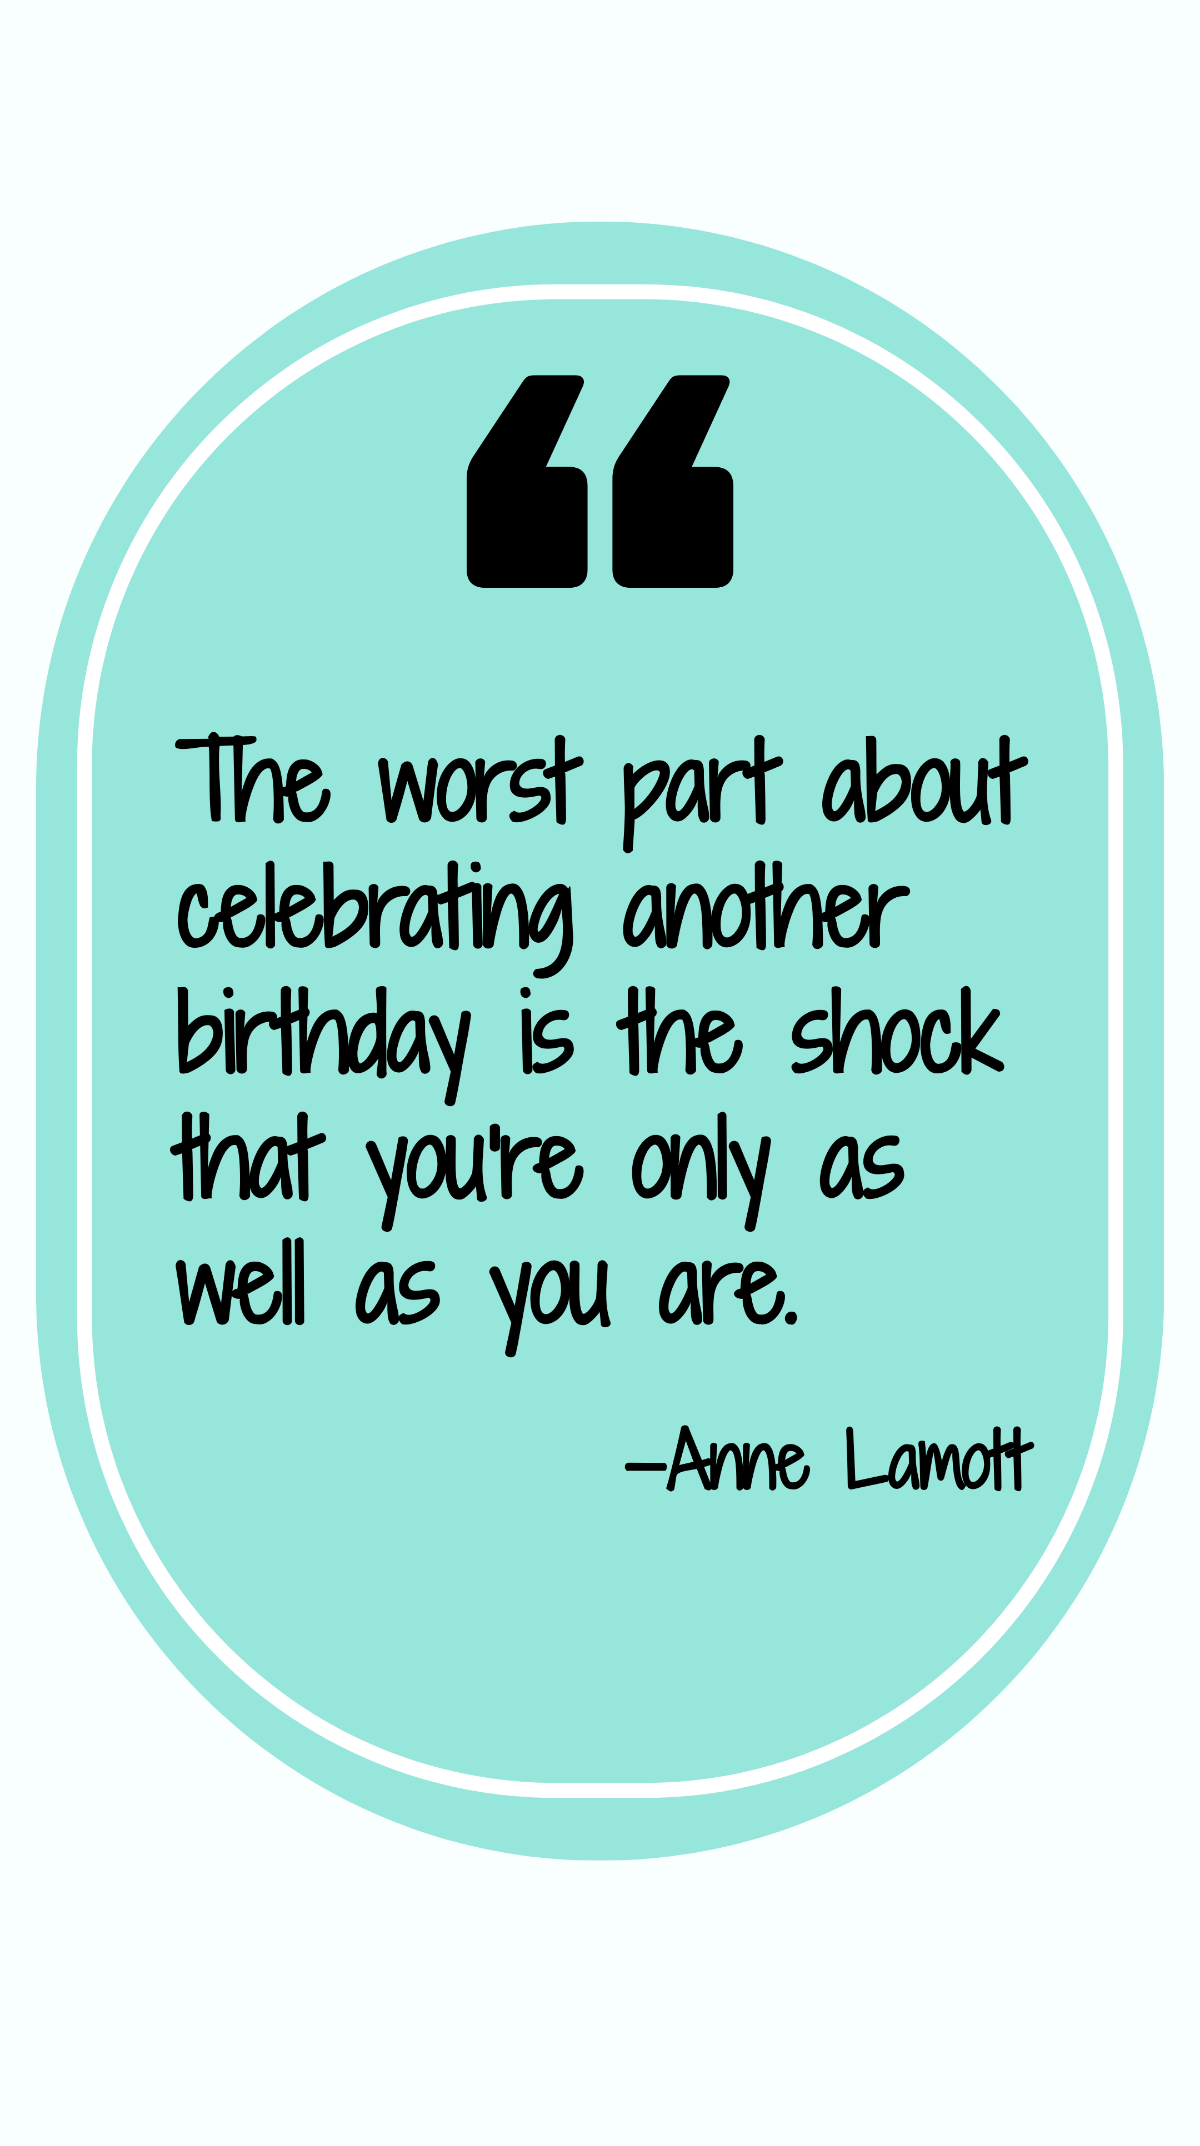 Anne Lamott - The worst part about celebrating another birthday is the shock that you're only as well as you are. Template